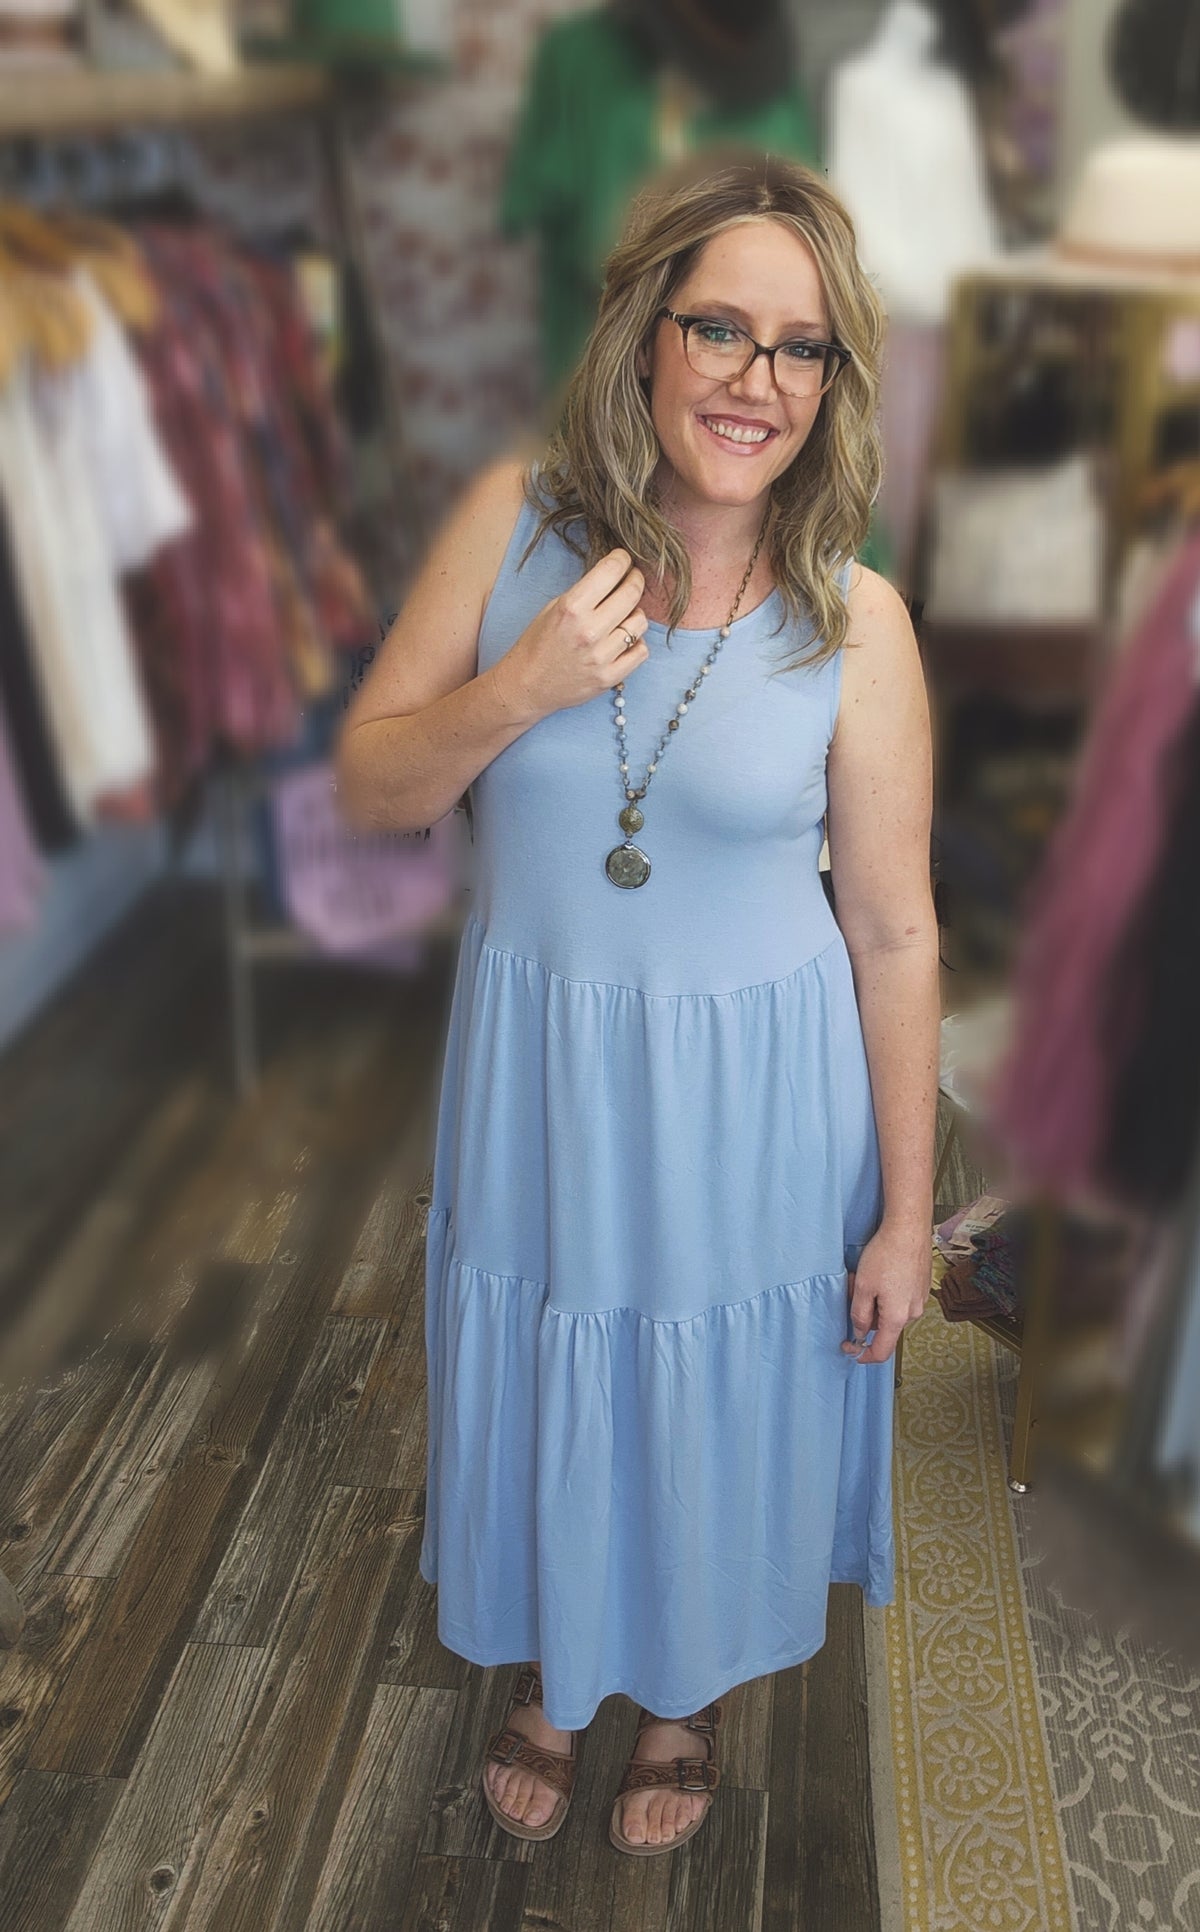 Sunny Day Dress in Lake Blue Sm - 3XL * on sale